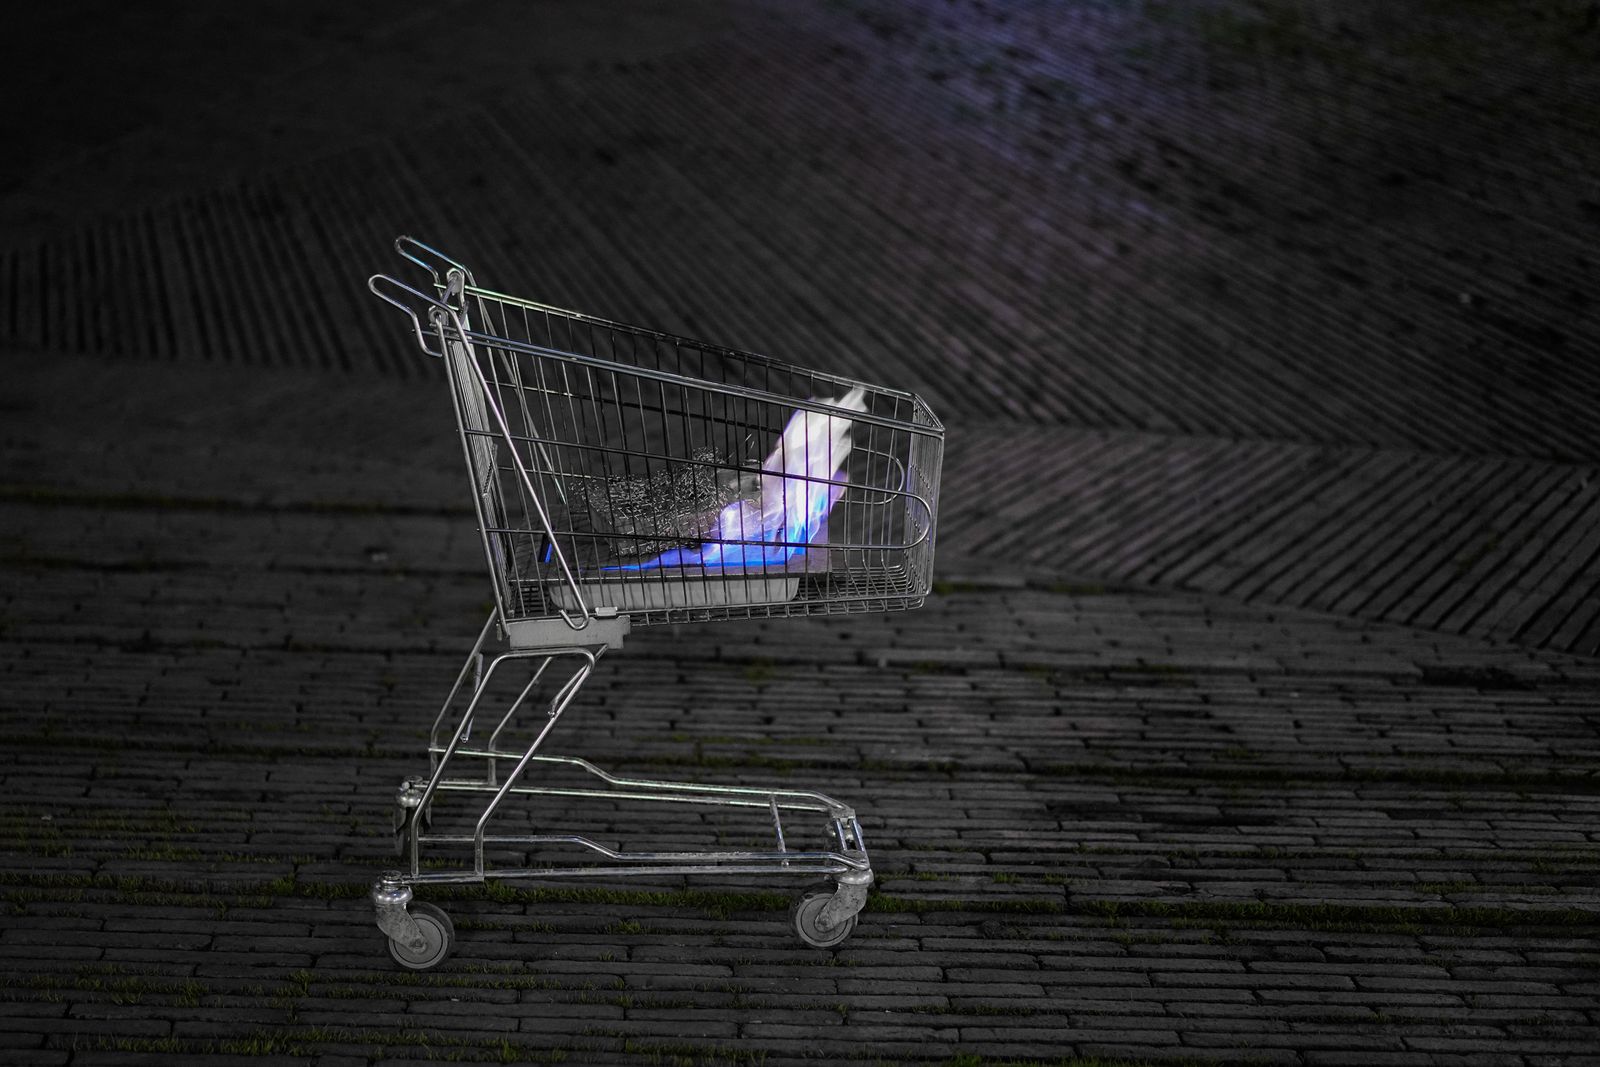 © Ting Miao - A burning shopping cart in the street